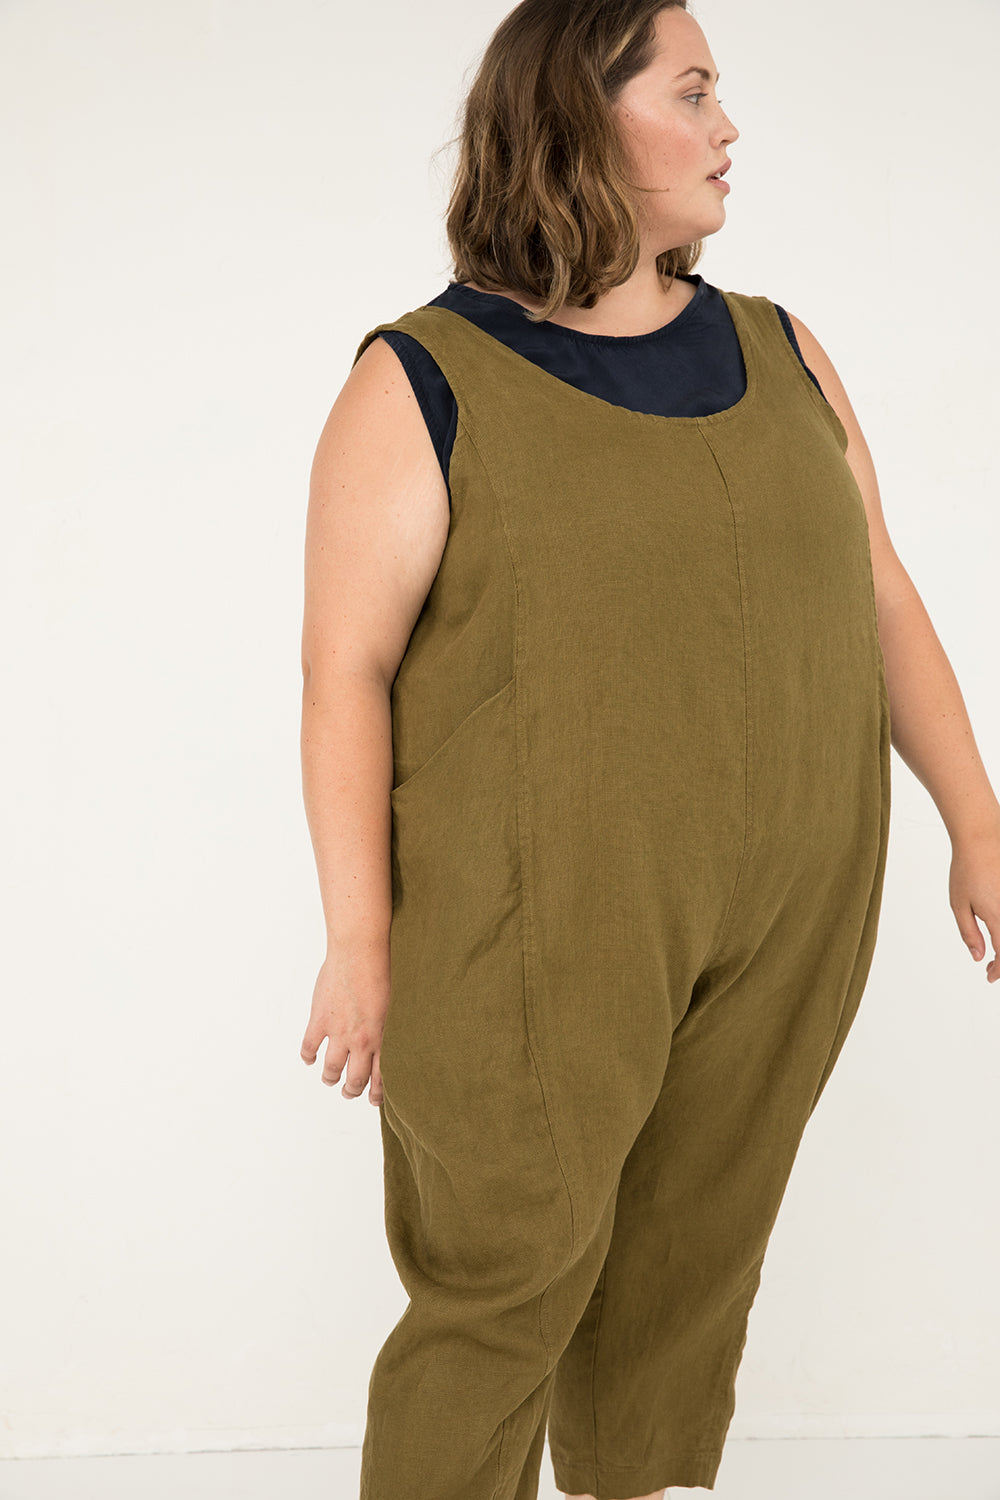 Clyde Jumpsuit in Midweight Linen#color_olive